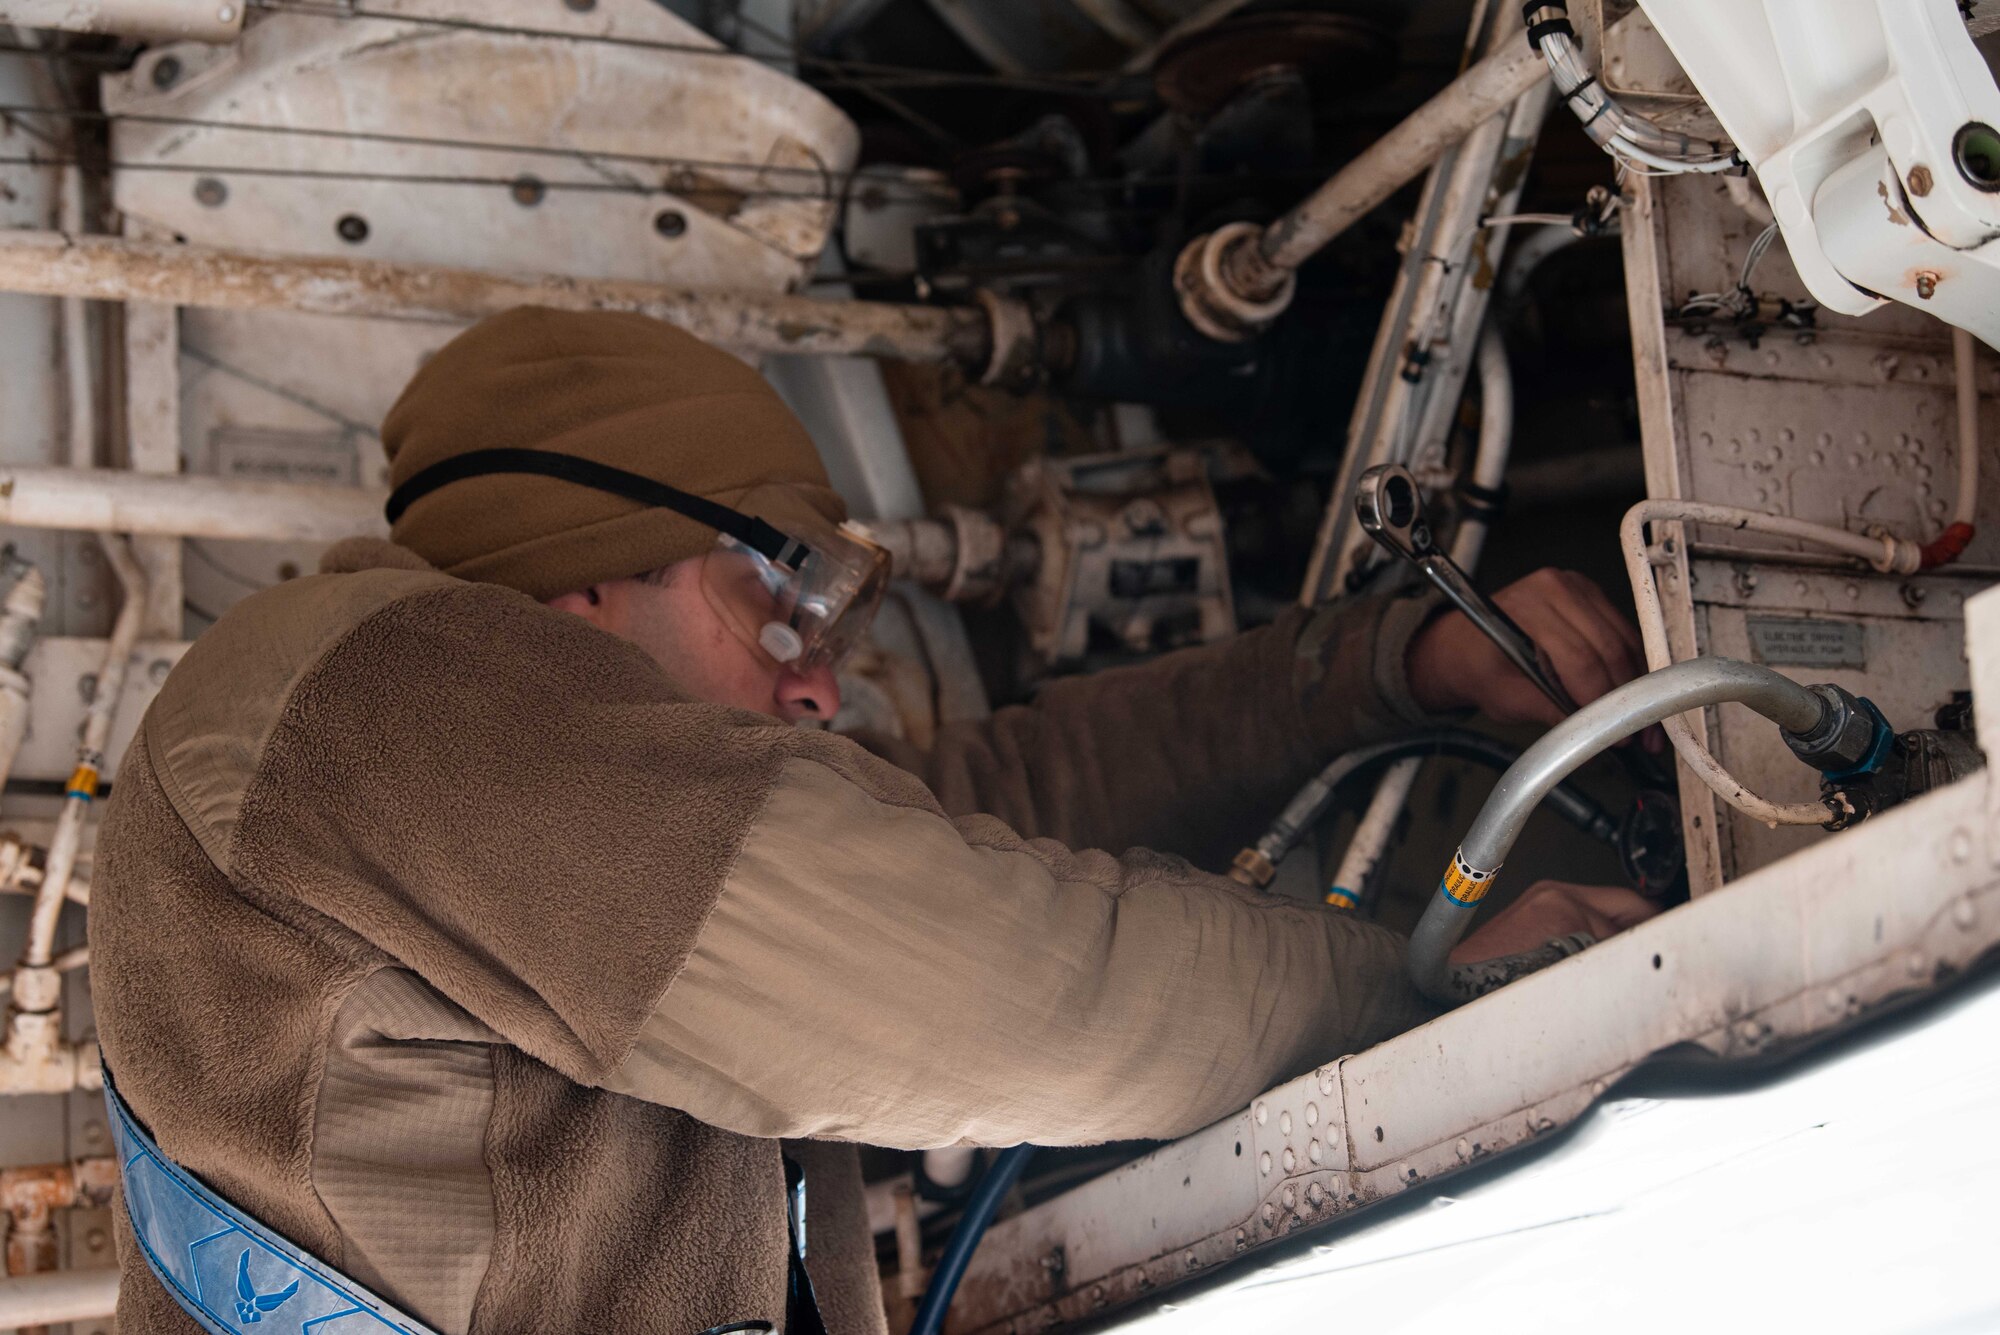 Airman Christopher Anderson, 22nd Aircraft Maintenance Squadron crew chief, services the preload accumulator on a KC-135 Stratotanker during Global thunder Nov. 5, 2021, at McConnell Air Force Base Kansas. The preload helps protect the hydraulic components during a pressure surge. Global Thunder is an annual command and control exercise designed to train U.S. Strategic Command forces and assess joint operation readiness. (U.S. Air Force Photo by Airman 1st Class Zachary Willis)